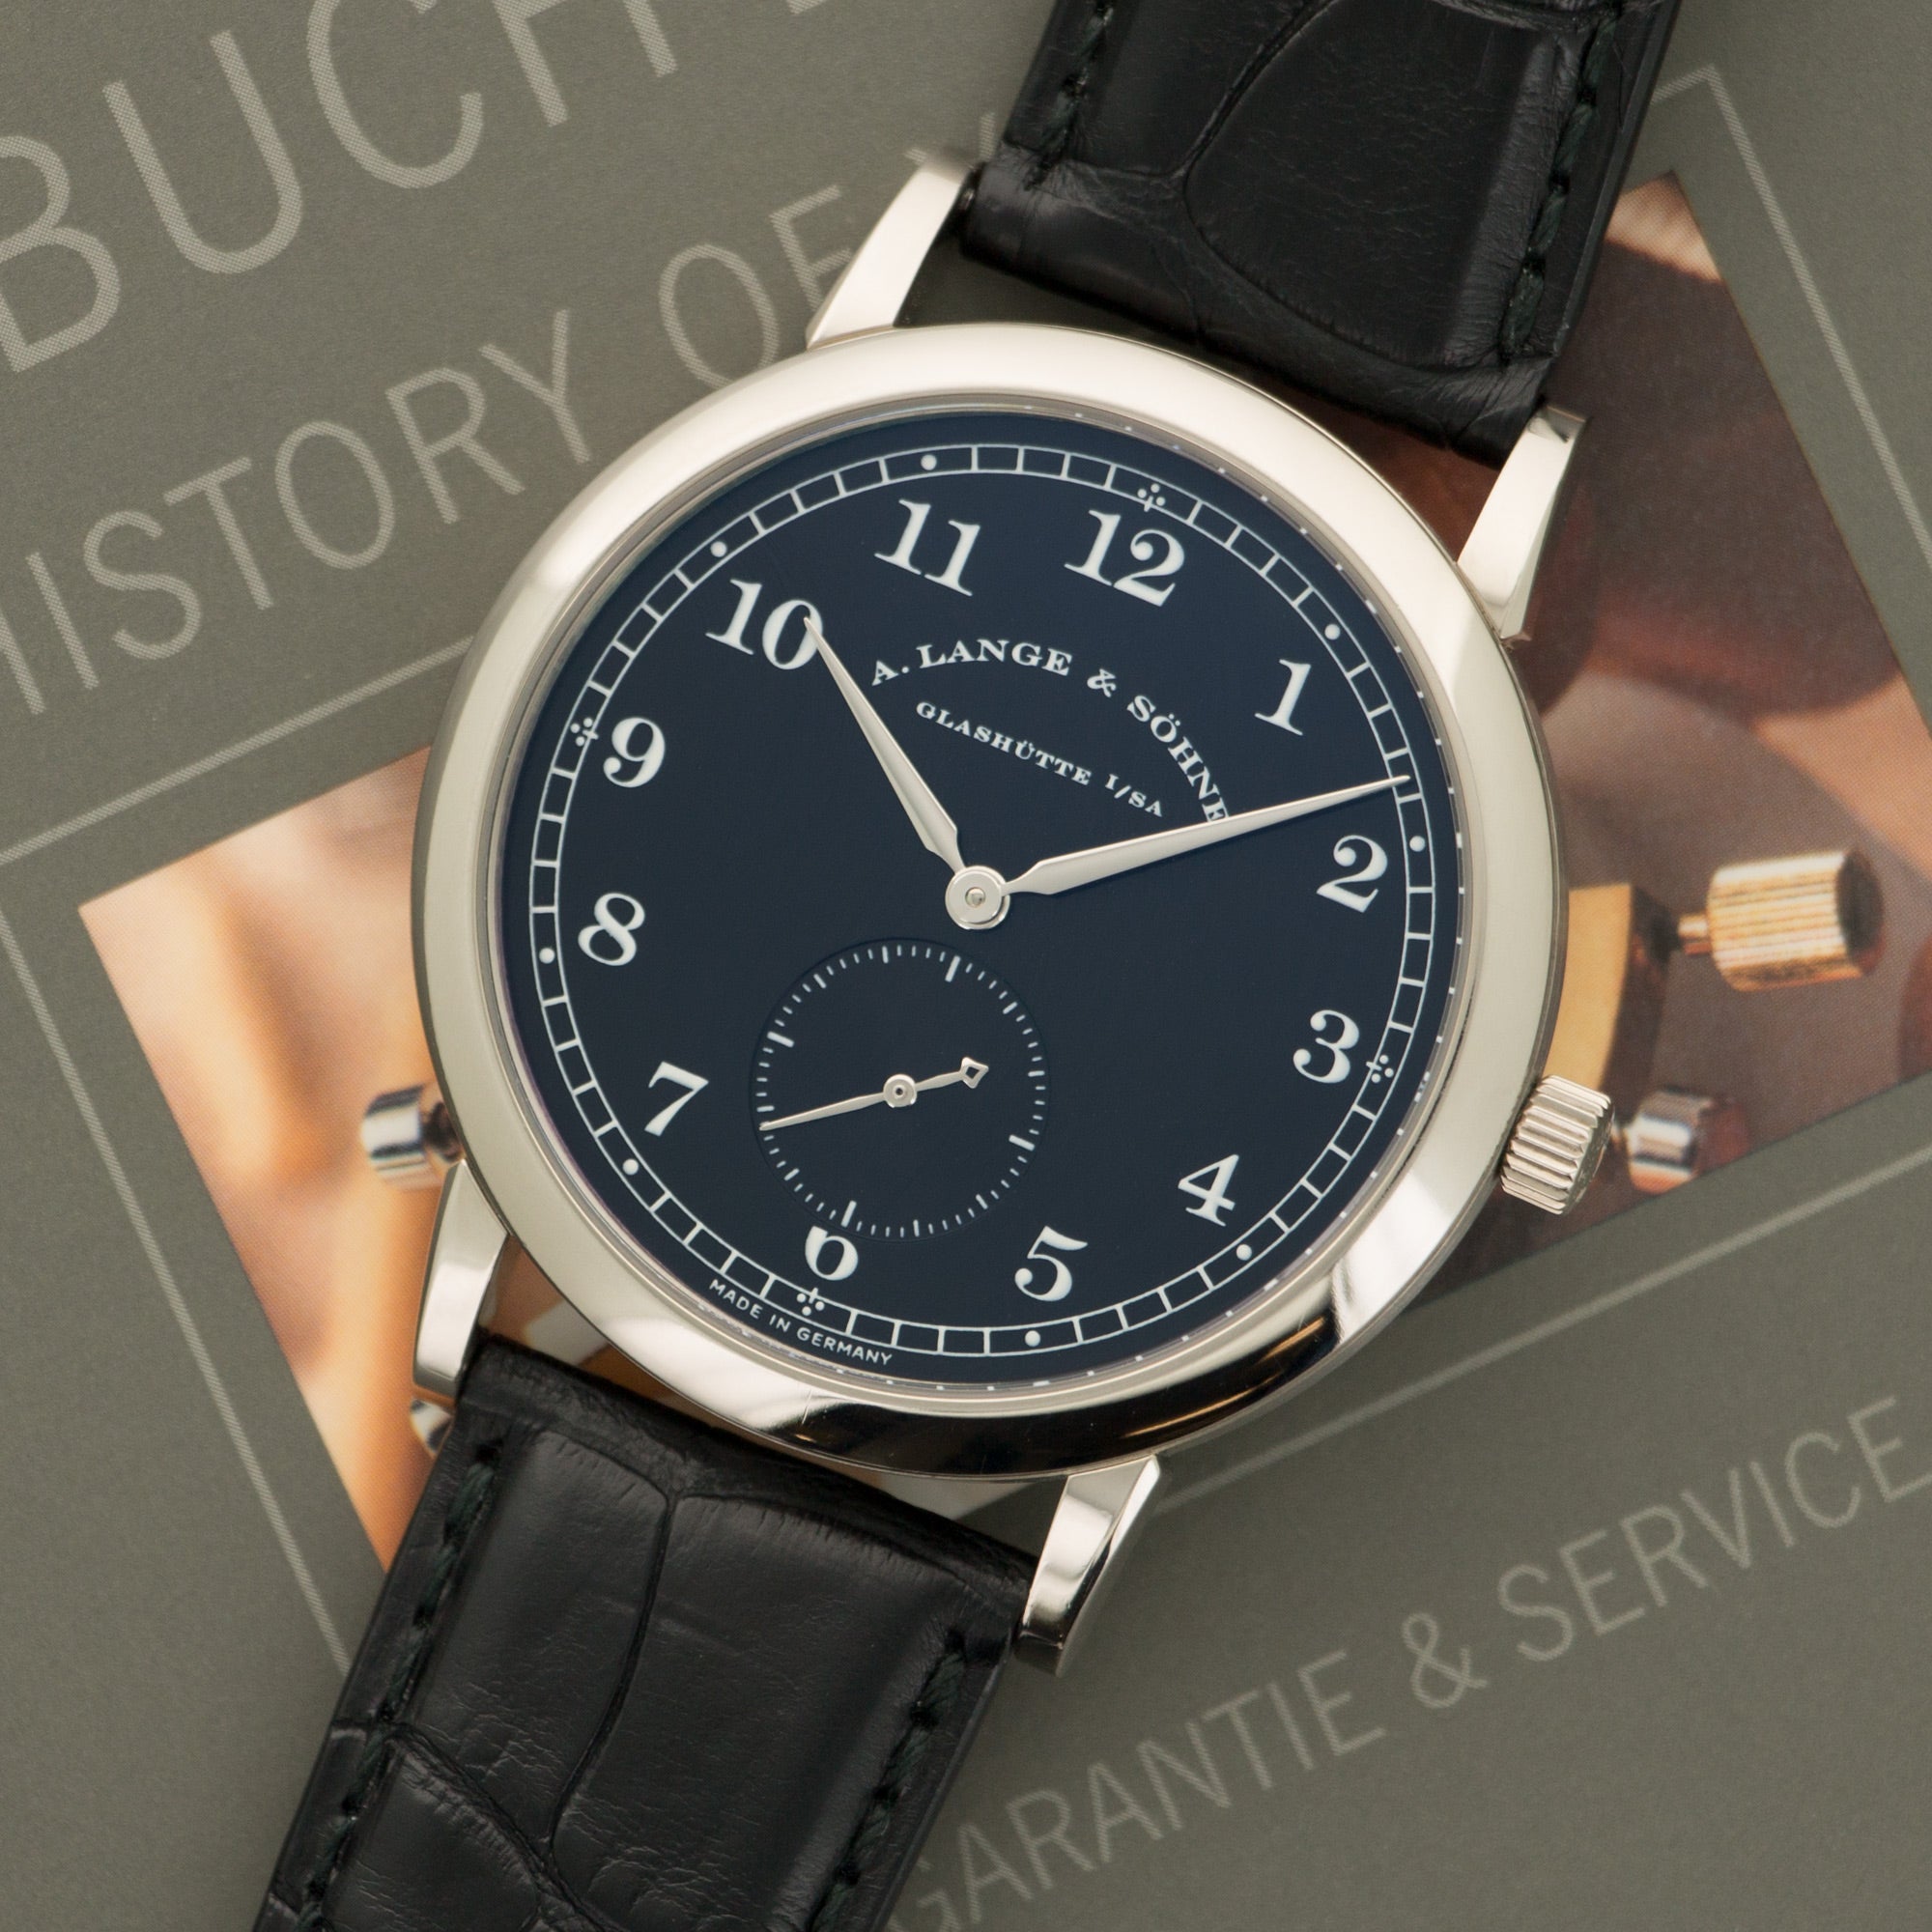 A. Lange &amp; Sohne - A. Lange &amp; Sohne White Gold 1815 Watch Ref. 206.029 - The Keystone Watches